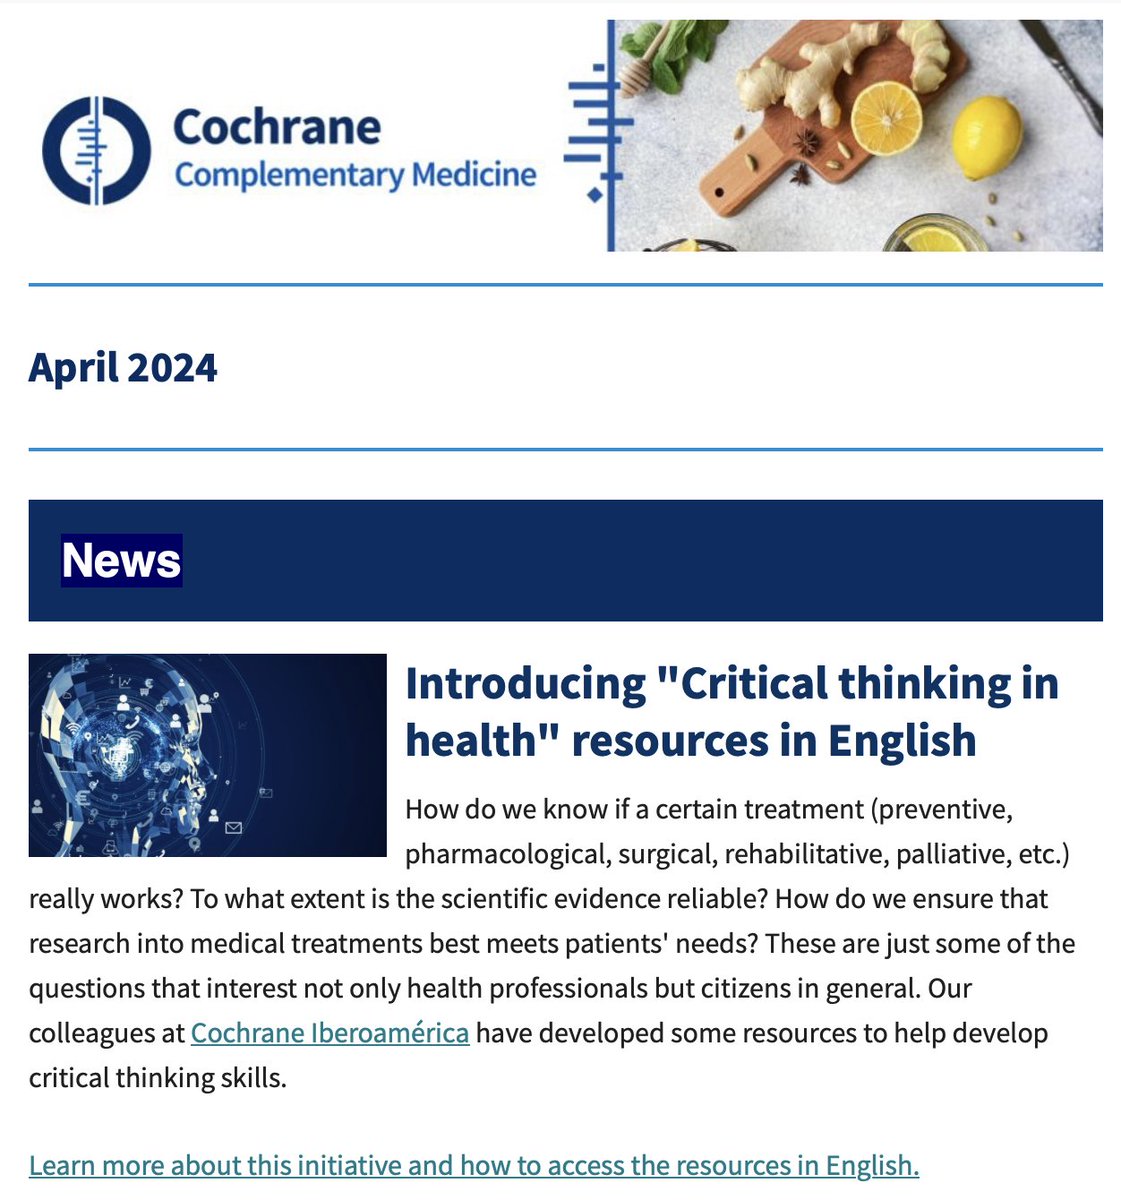 📣 Our quarterly newsletter is now available! Get updates on: 🔎Critical thinking in health resources in English 🤖An upcoming Cochrane web clinic on evidence synthesis and AI ...plus a selection of our latest 🎻blogshots & more! mailchi.mp/d6bcc0cef54c/t…] @cochranecollab